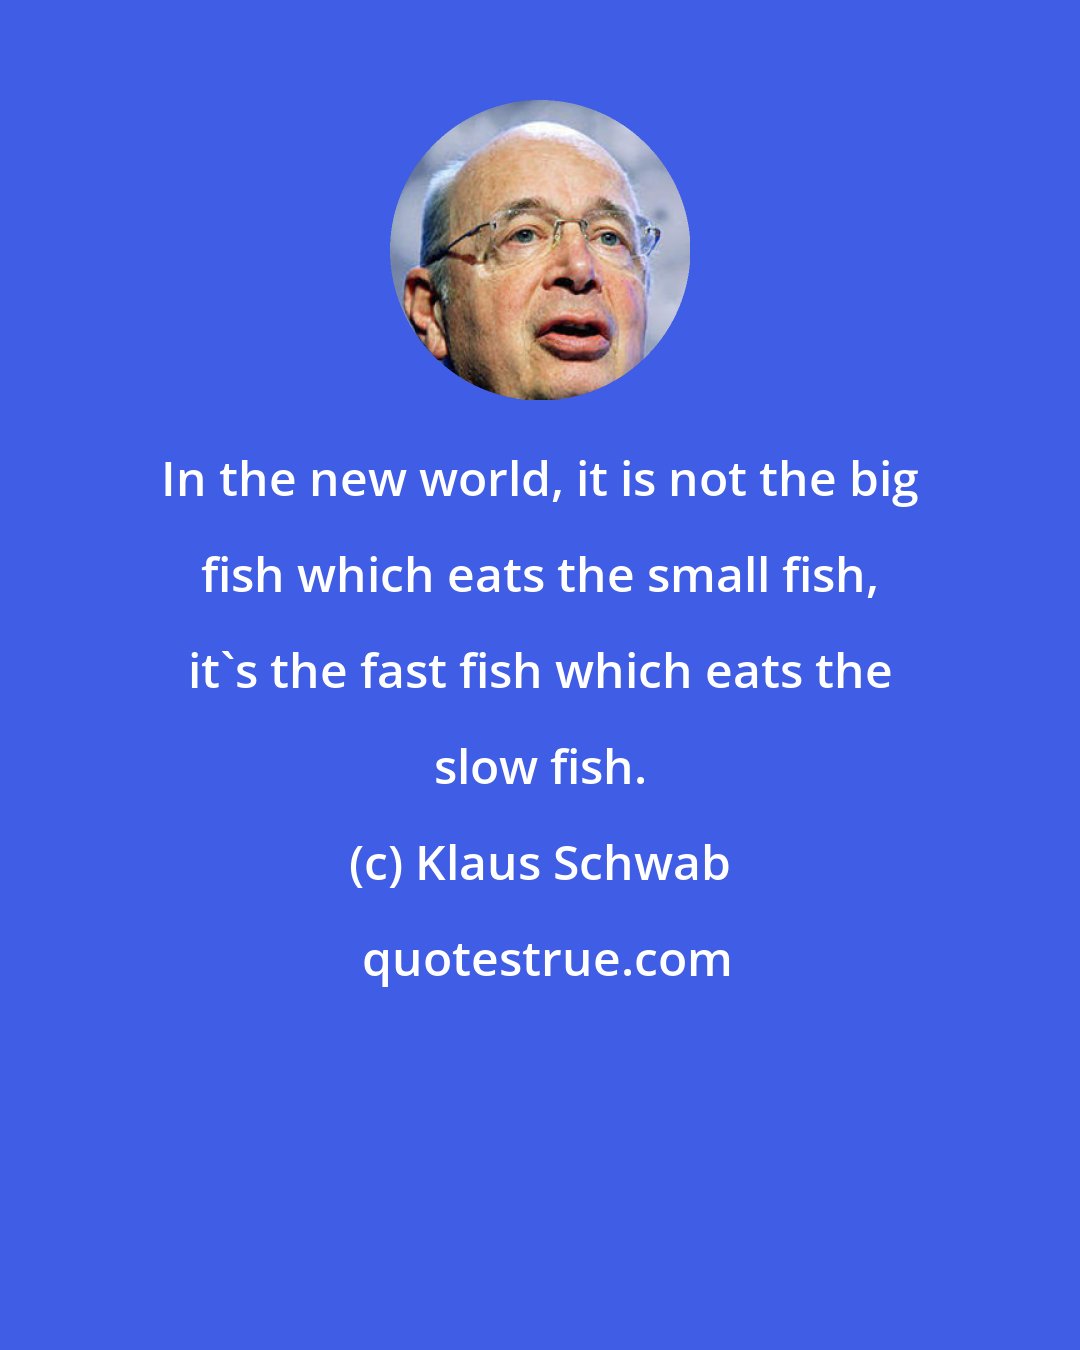 Klaus Schwab: In the new world, it is not the big fish which eats the small fish, it's the fast fish which eats the slow fish.